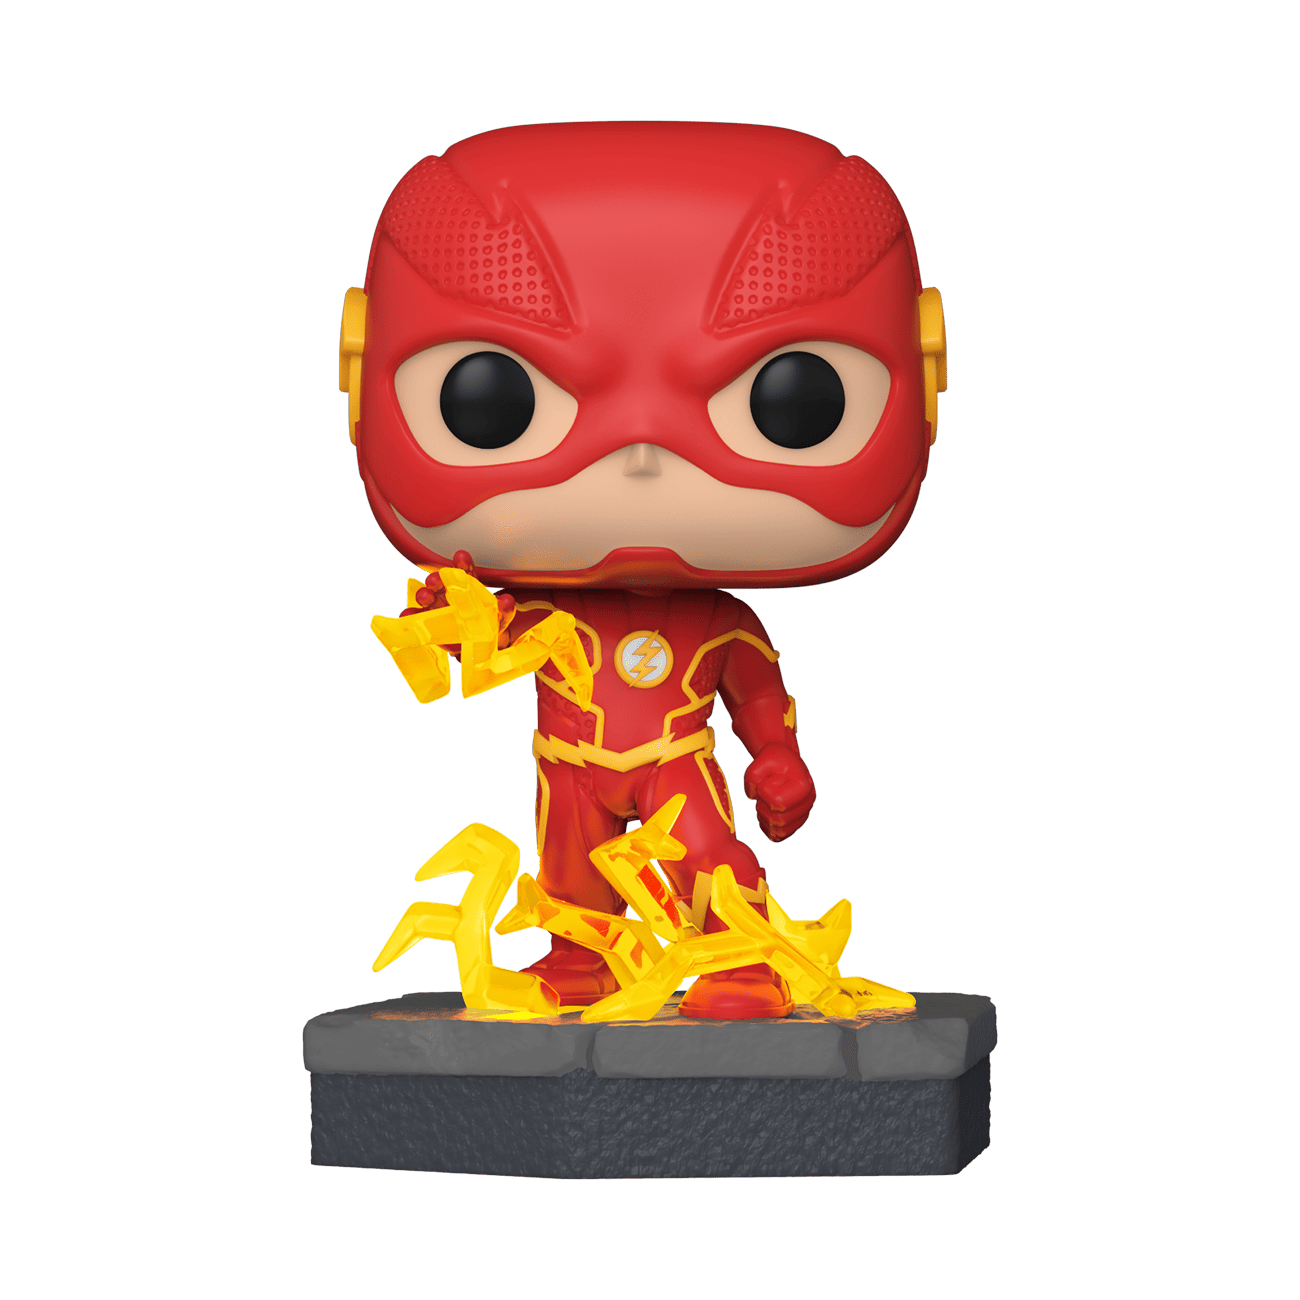 Buy Pop! Lights and Sounds The Flash at Funko.